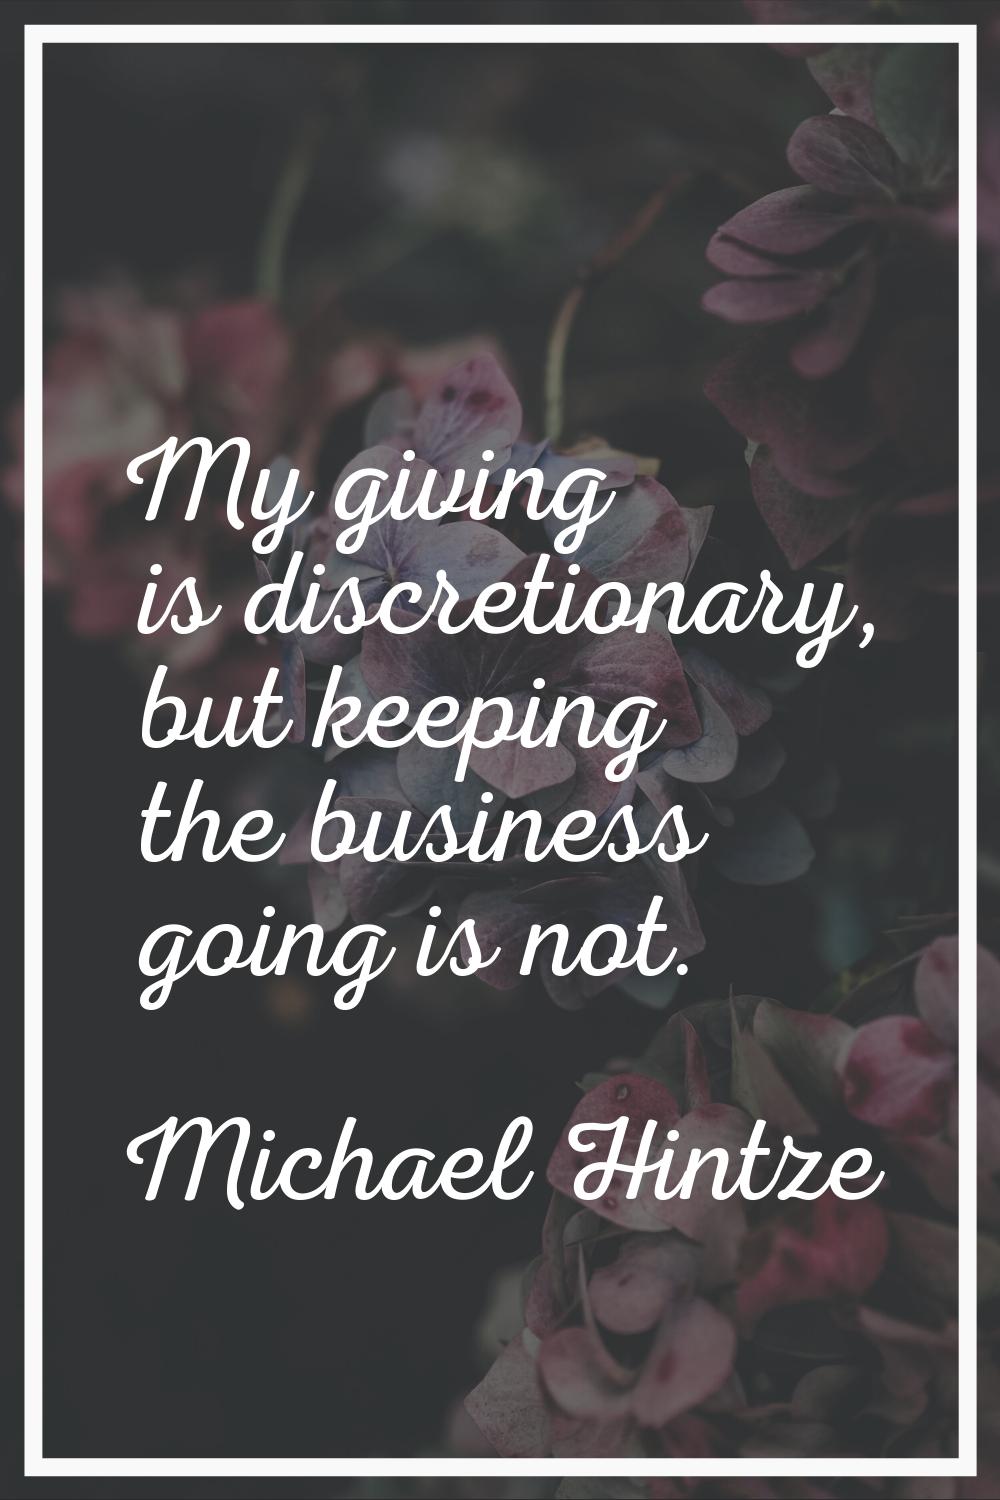 My giving is discretionary, but keeping the business going is not.